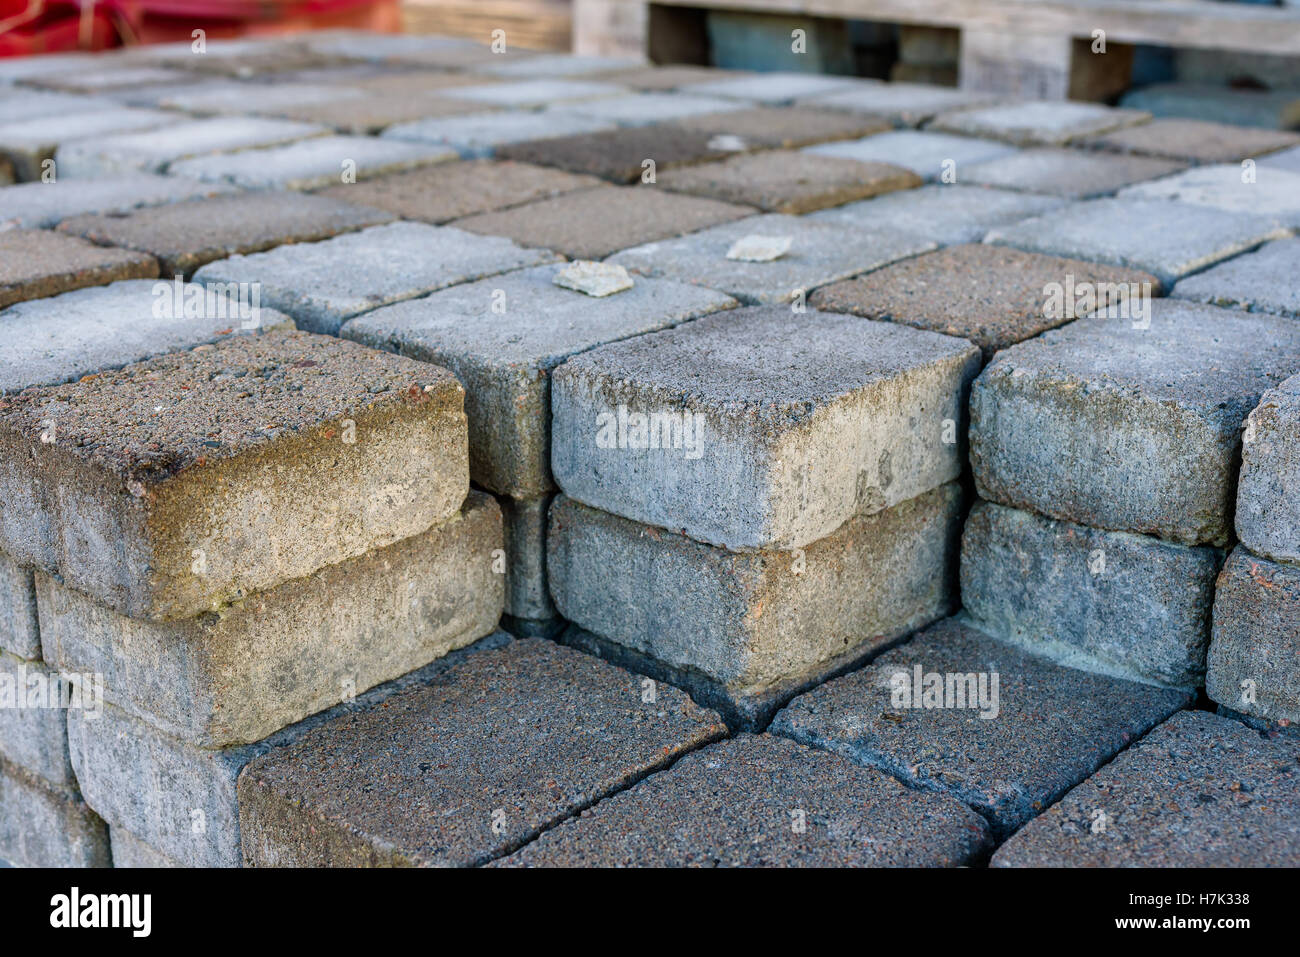 Stack of small rectangular concrete pavers. Stock Photo